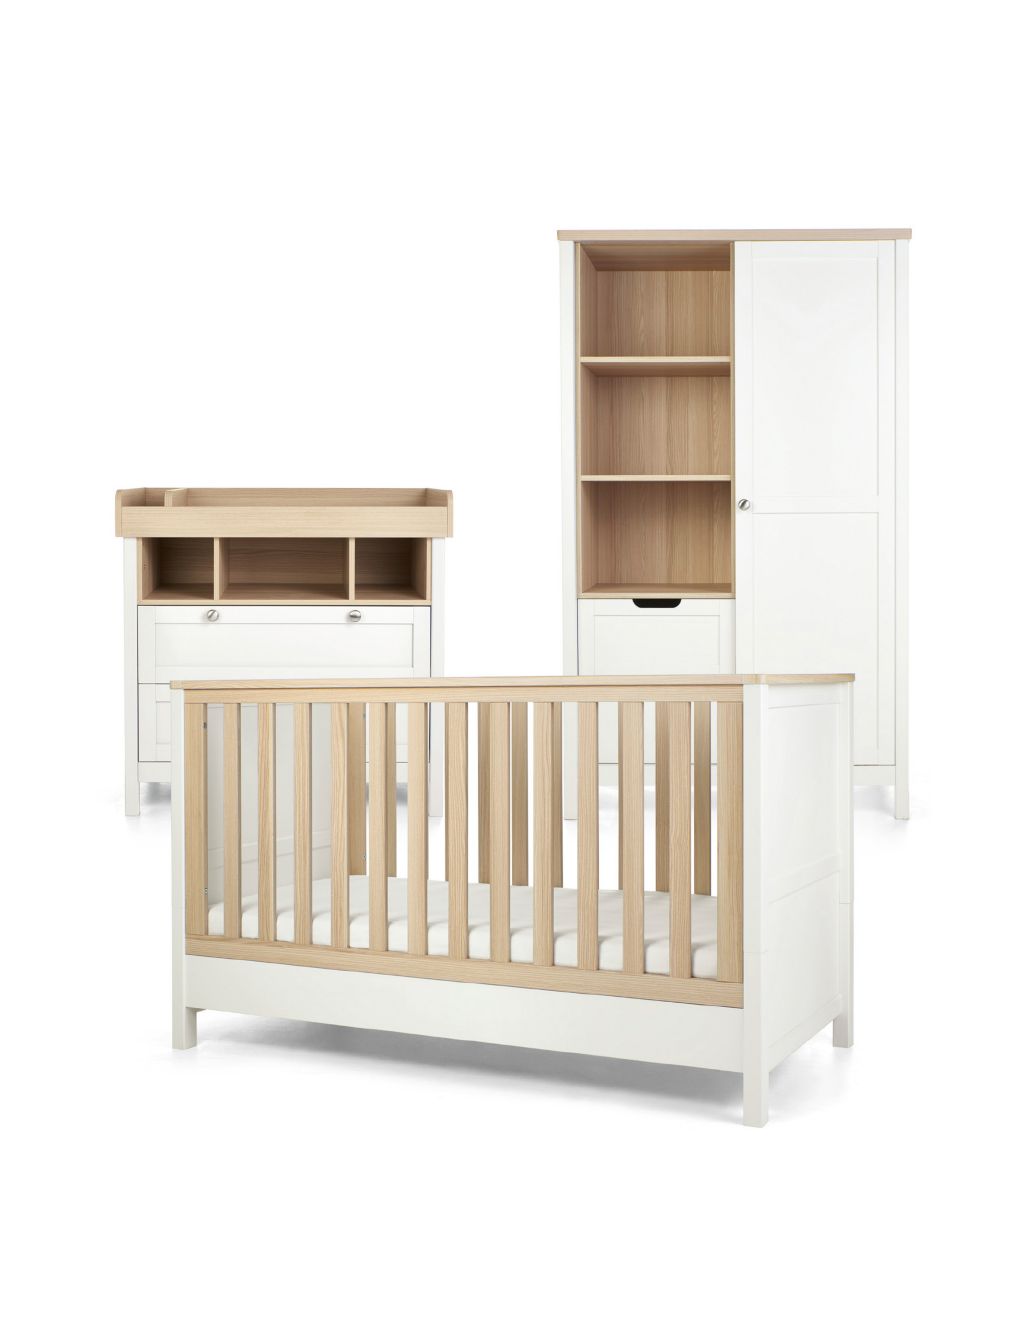 Harwell 3 Piece Cotbed Range with Dresser and Wardrobe image 1